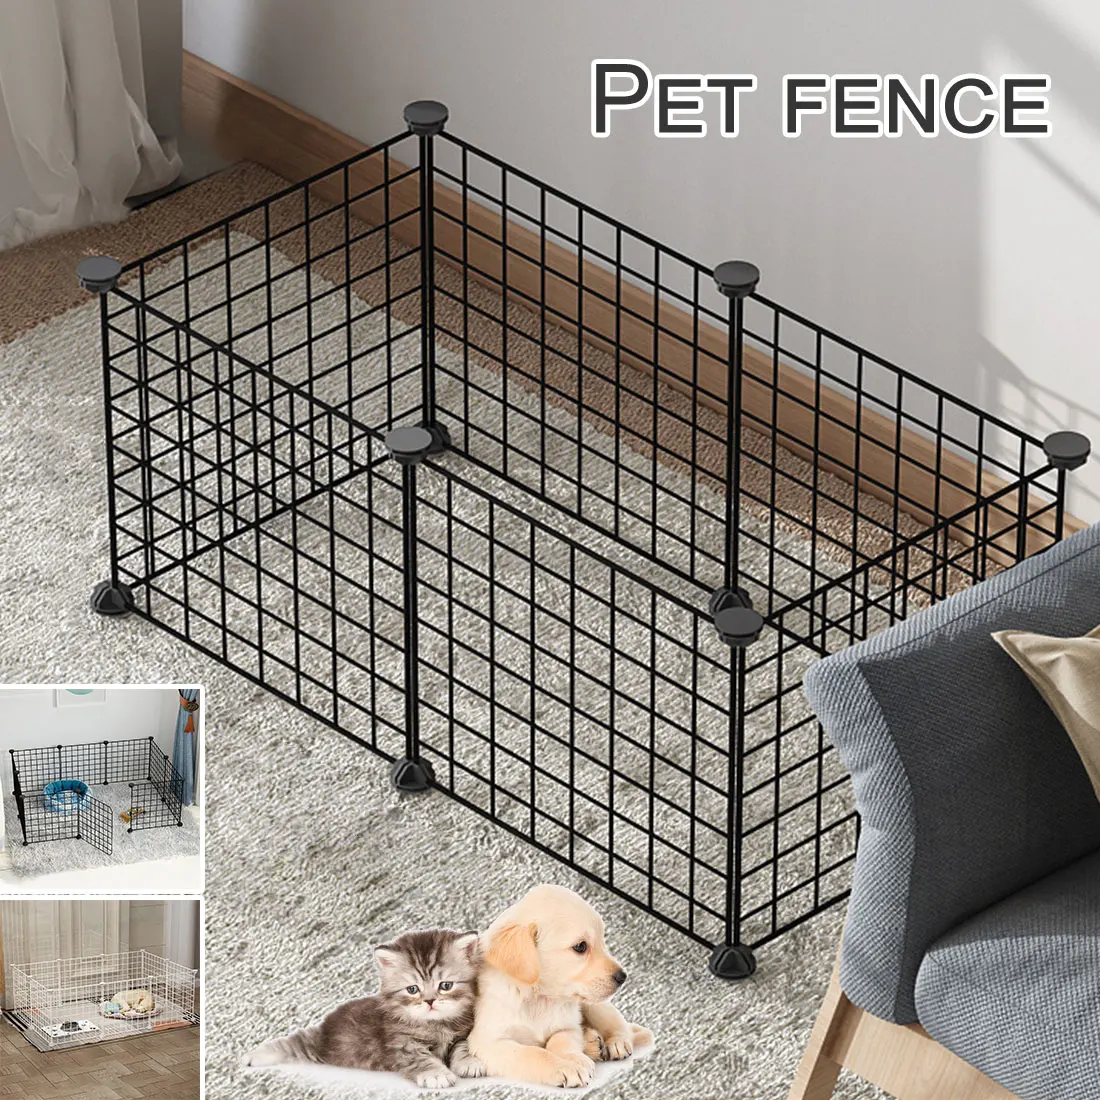 collapsible-pet-fence-iron-fence-puppy-cat-litter-house-sports-training-space-dog-supplies-rabbit-guinea-pig-cage